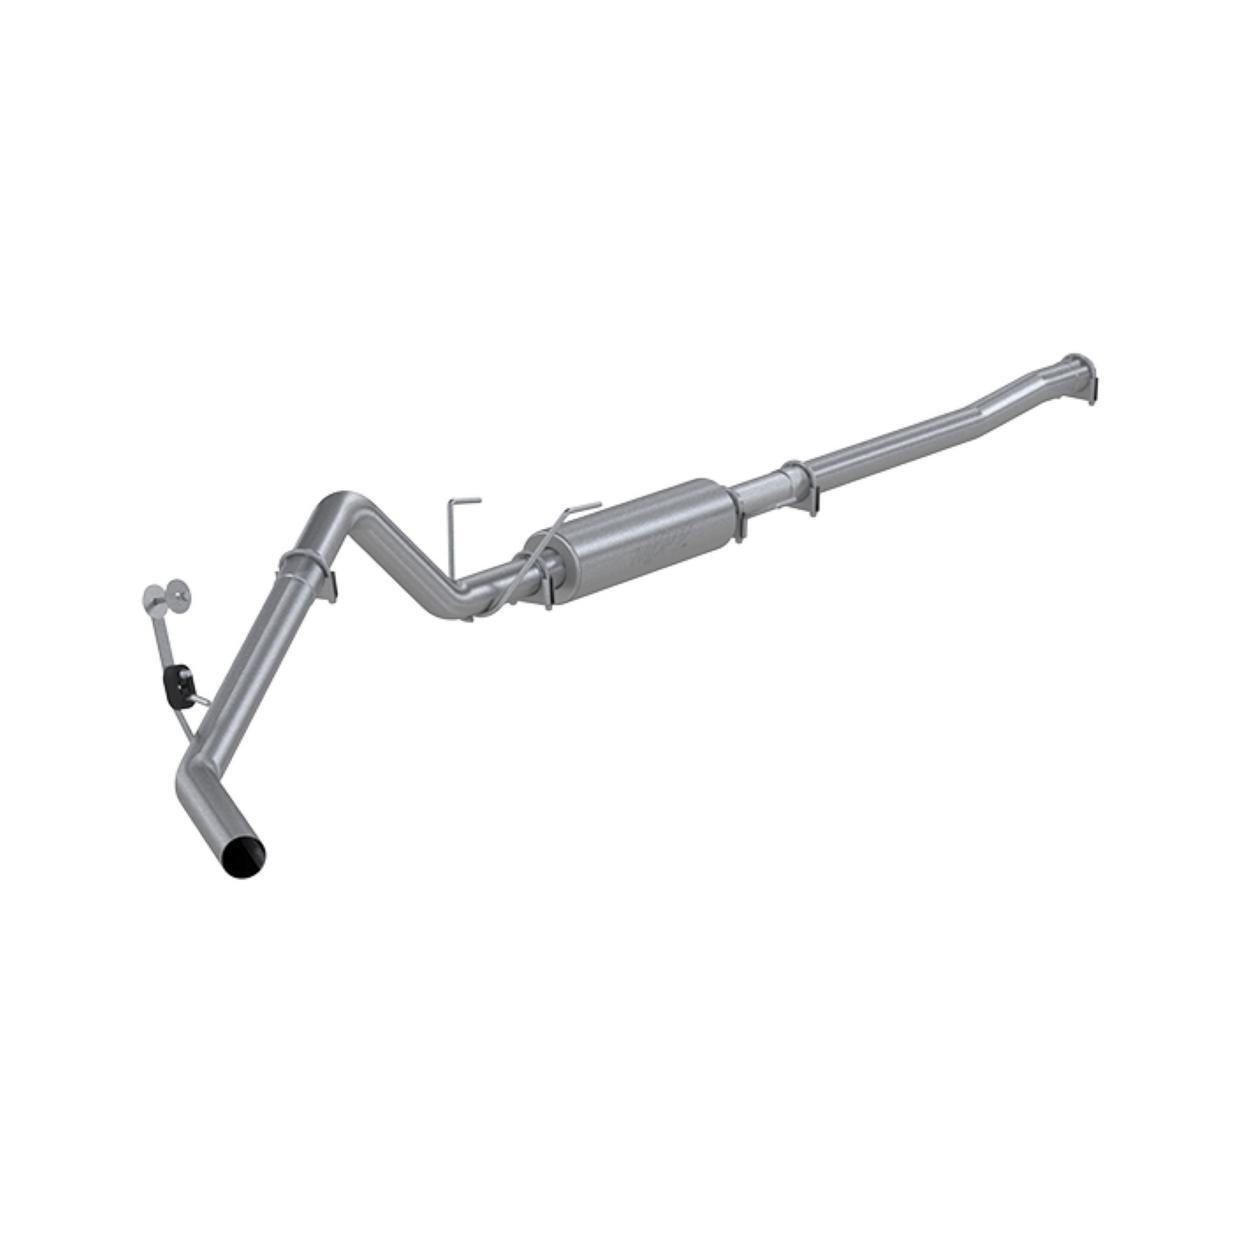 MBRP Exhaust System Kit for 2003-2005 Dodge Ram 3500